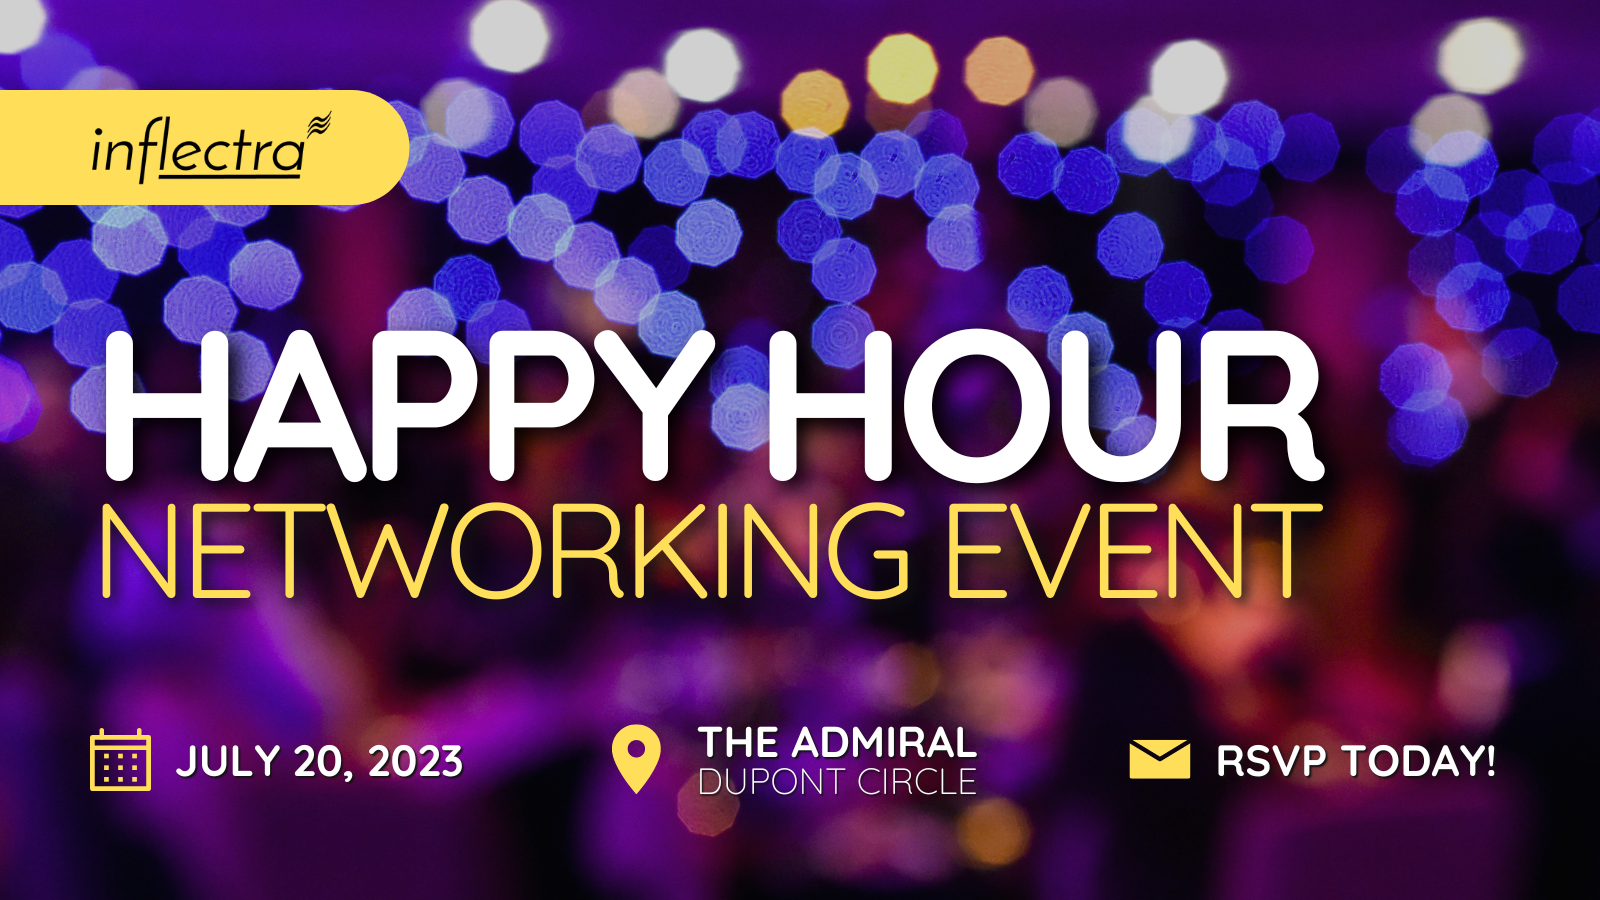 inflectra-hosts-happy-hour-networking-event-at-the-admiral-in-dupont-image